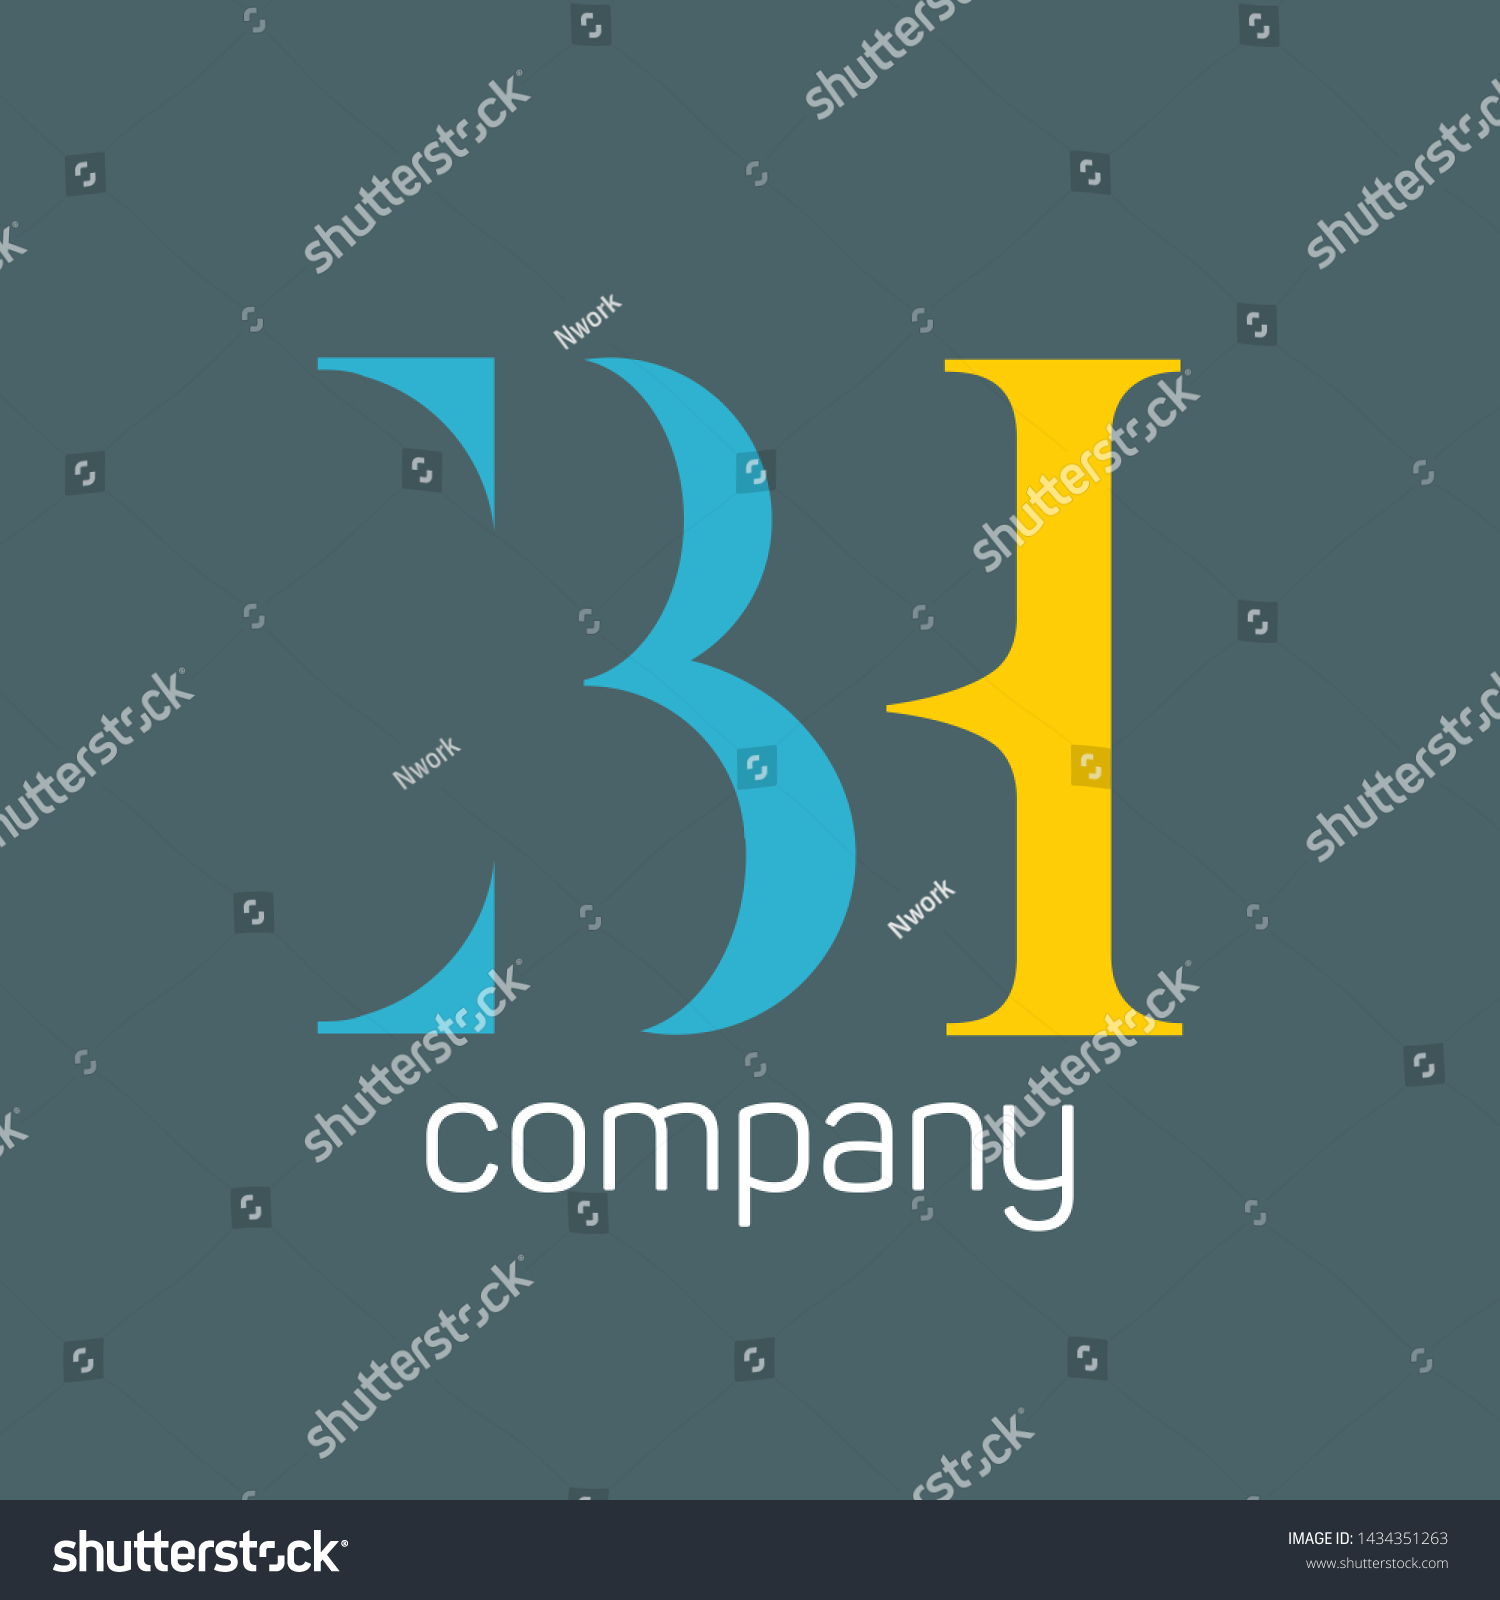 Bh Logo Design Monogram Logo Letters B And H Royalty Free Stock Vector 1434351263 